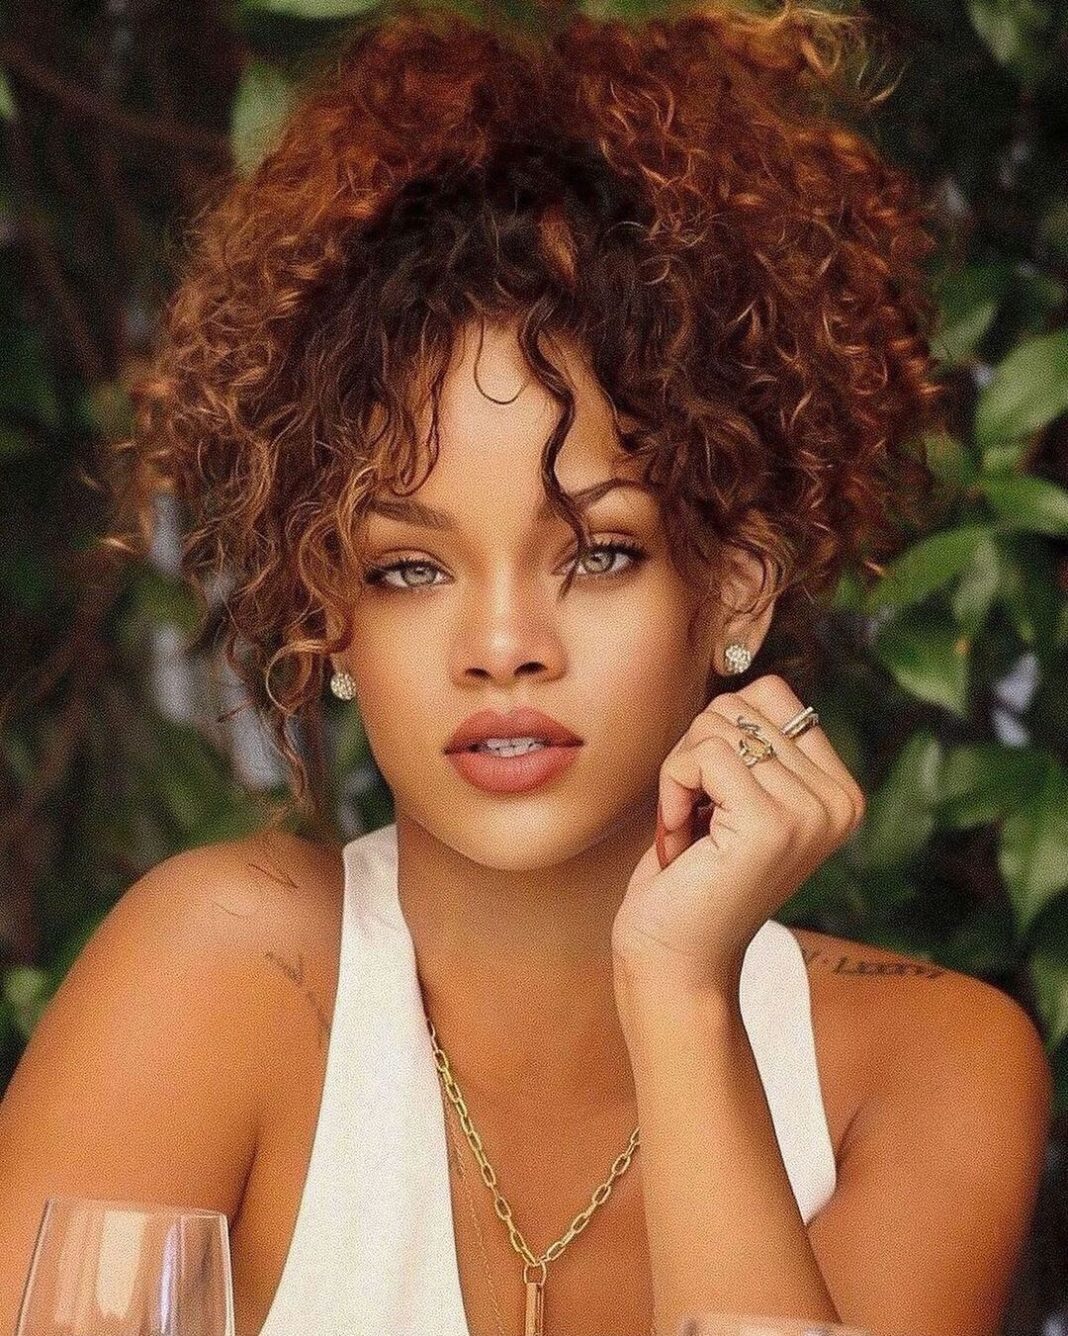 Rihanna Drops Lawsuit Against Her Father, Ronald Fenty